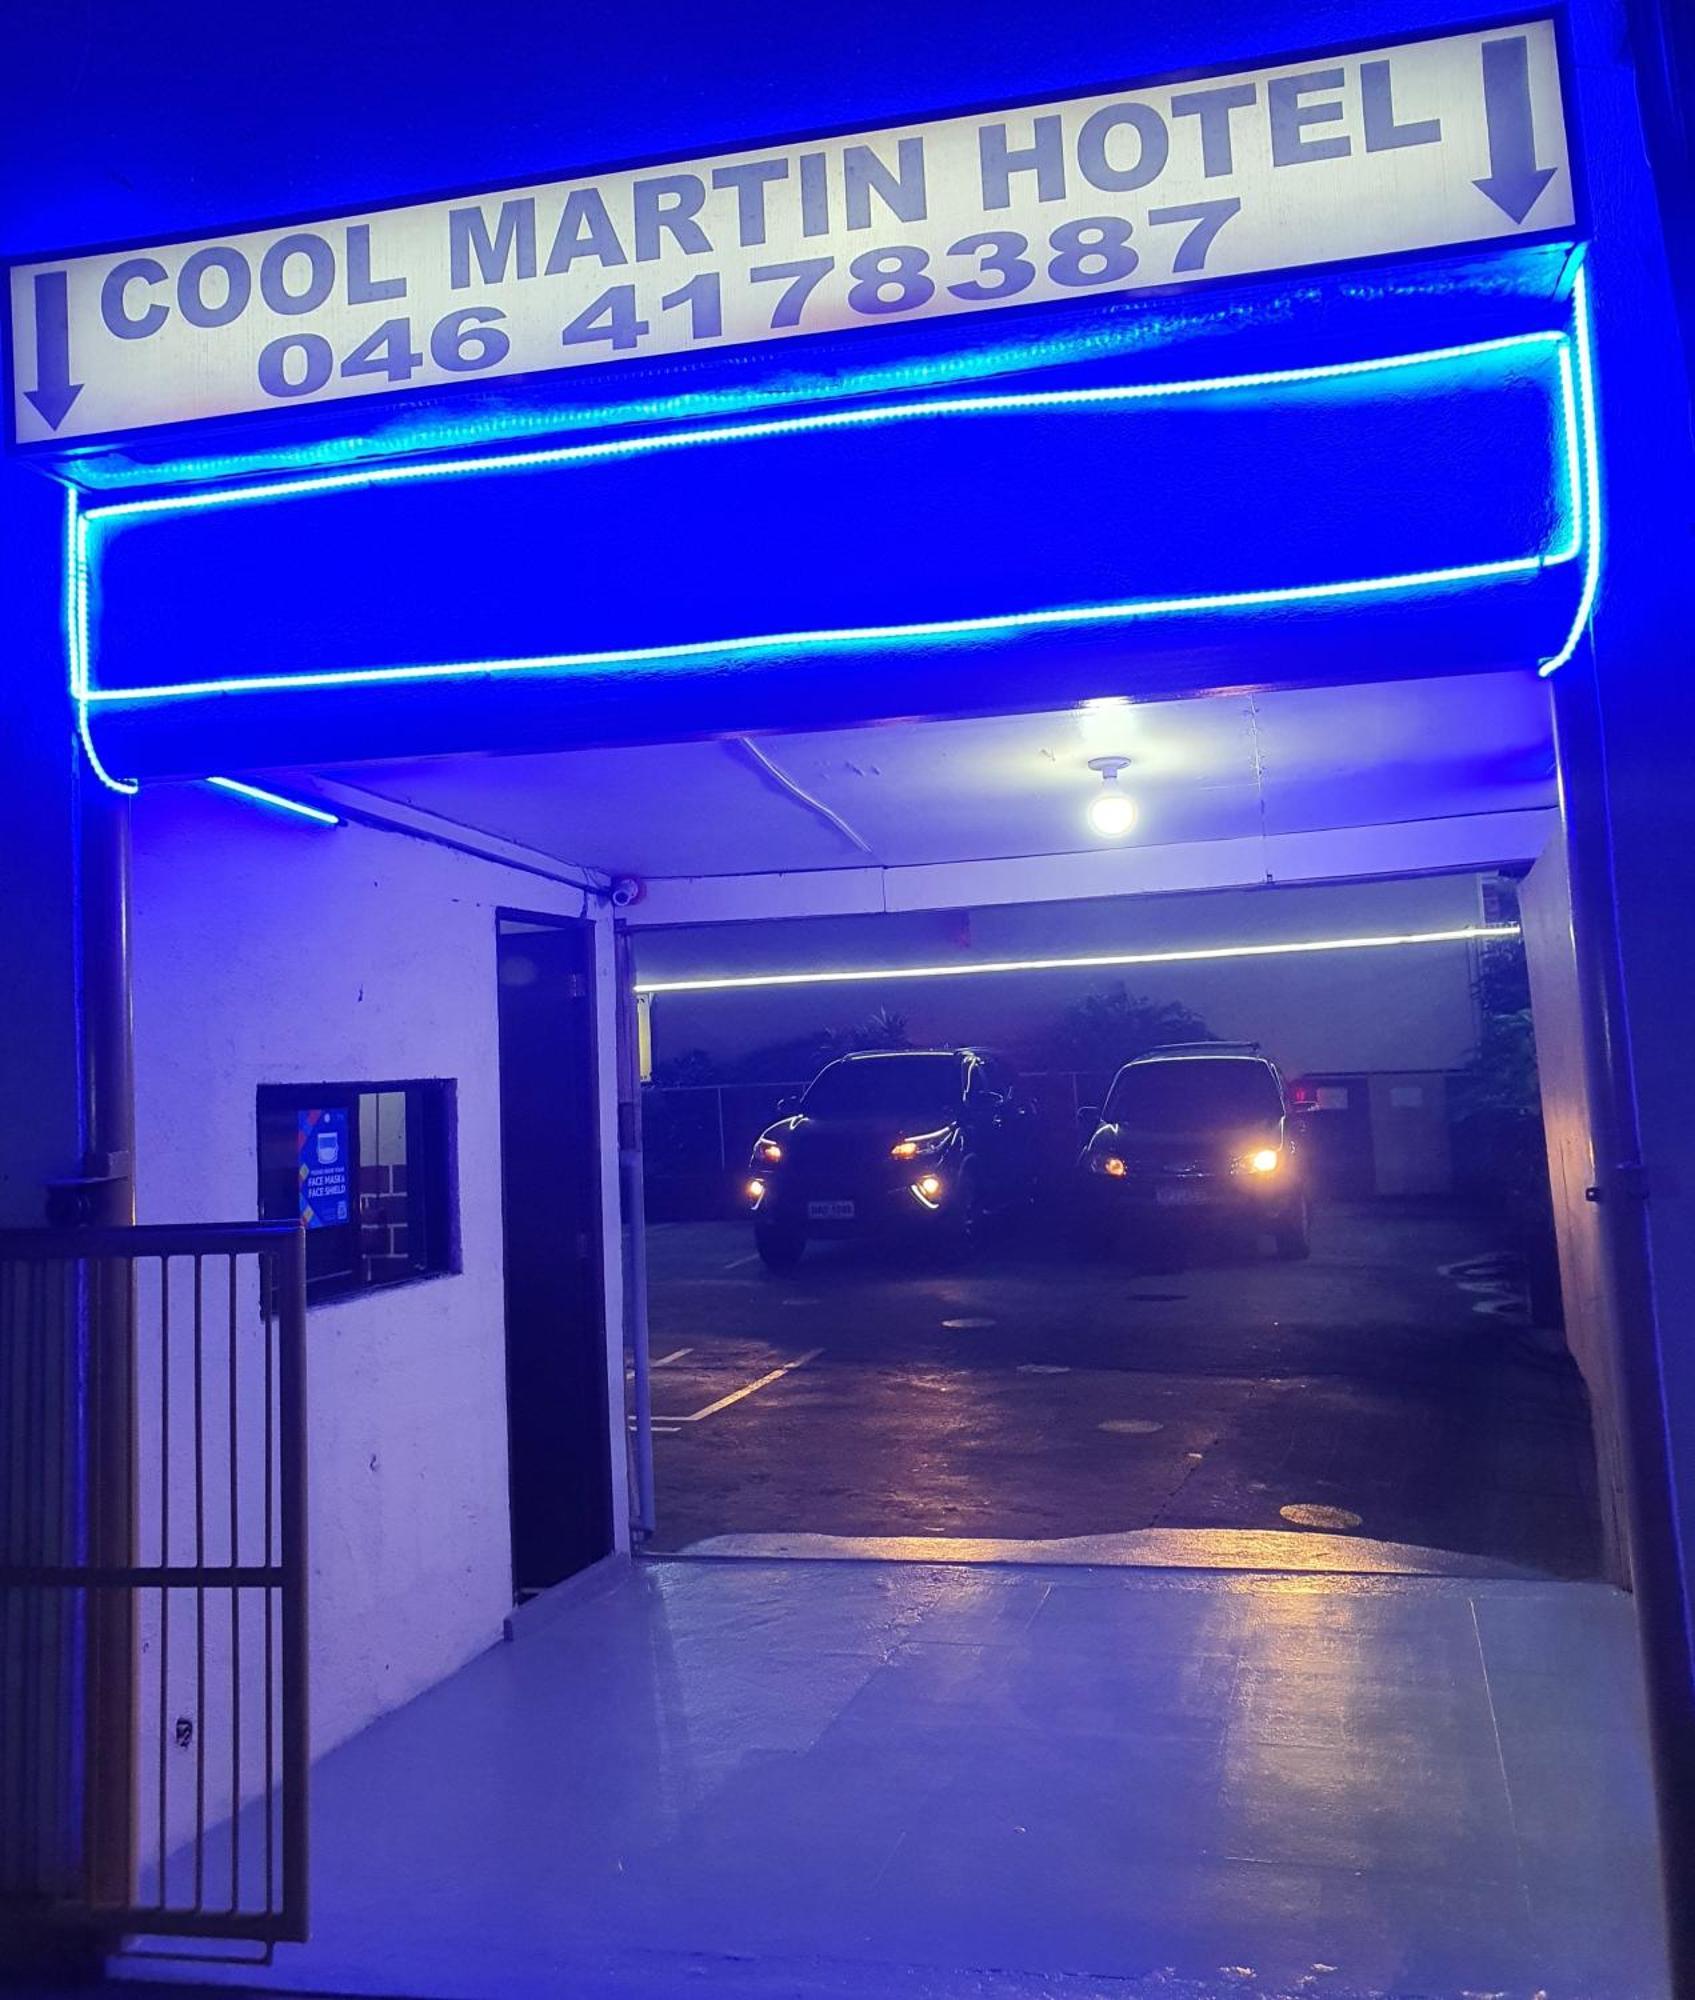 Cool Martin Family Hotel And Resort Bacoor 外观 照片